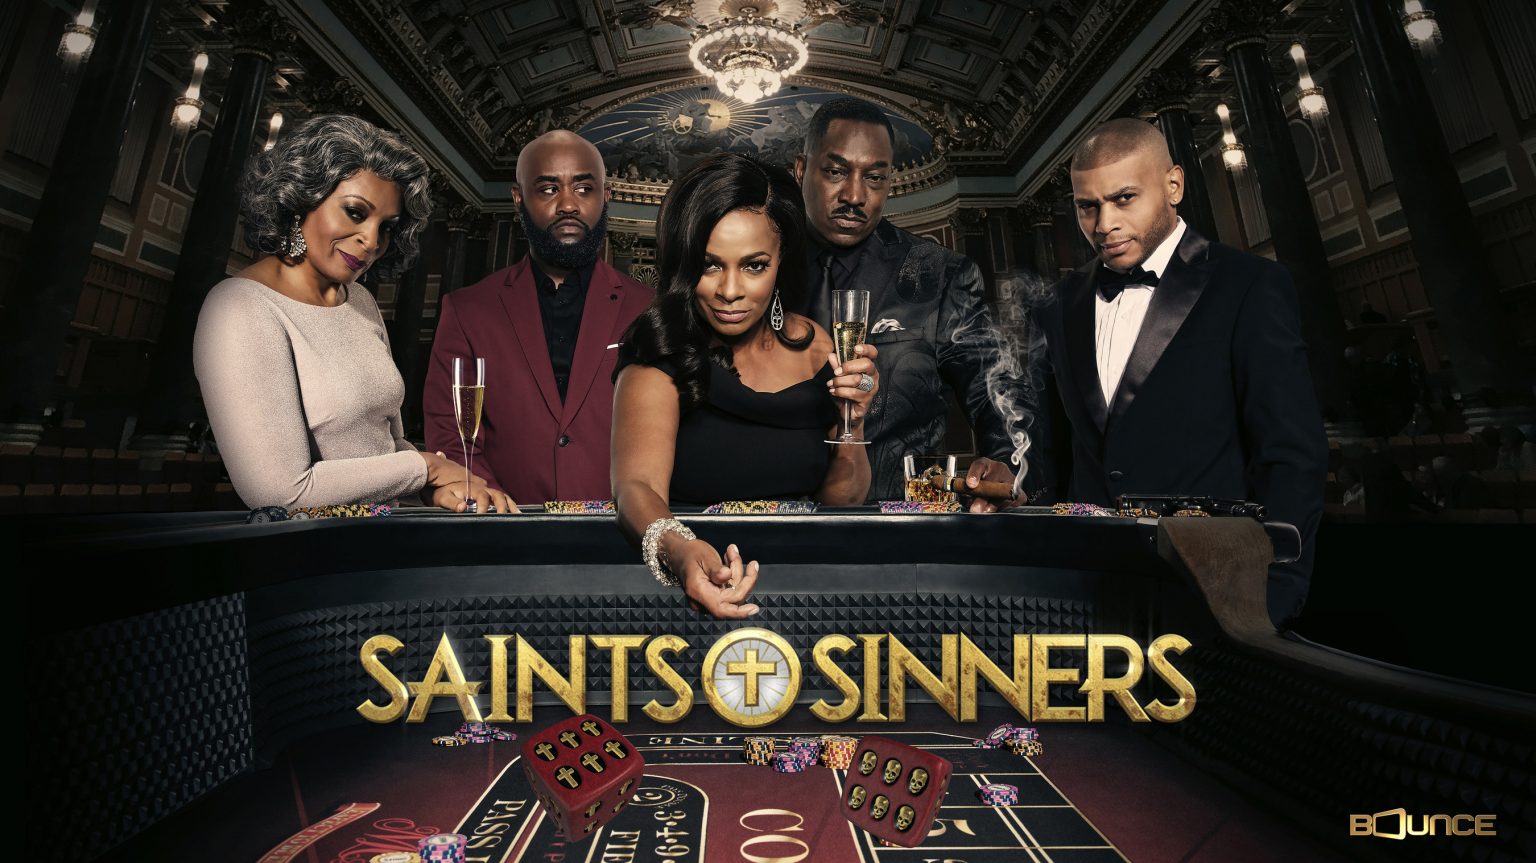 First Look at Season Four of Saints & Sinners Unveiled, Hit Bounce